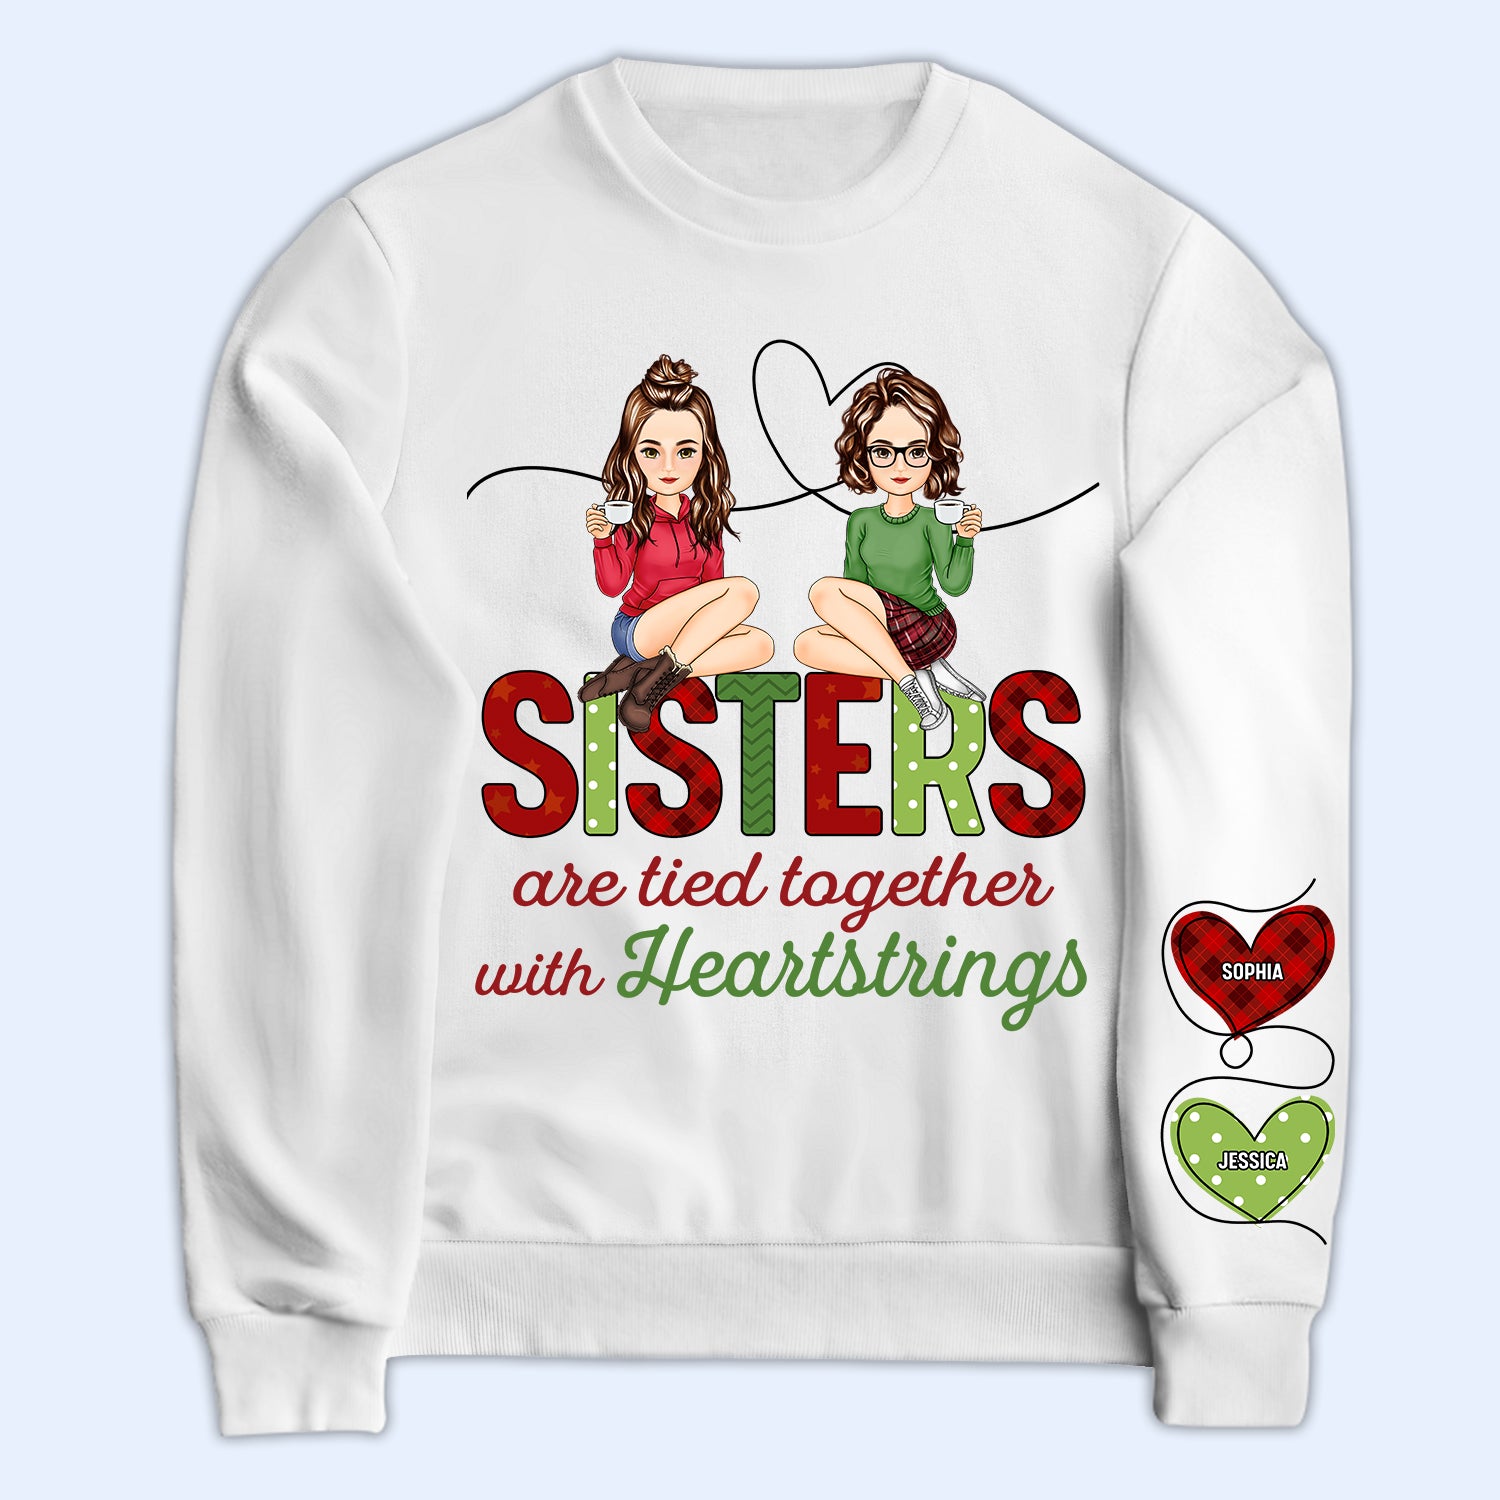 Sisters Are Tied Together With Heartstrings - Christmas Gift For Besties, Sisters - Personalized Sweatshirt With Sleeve Imprint